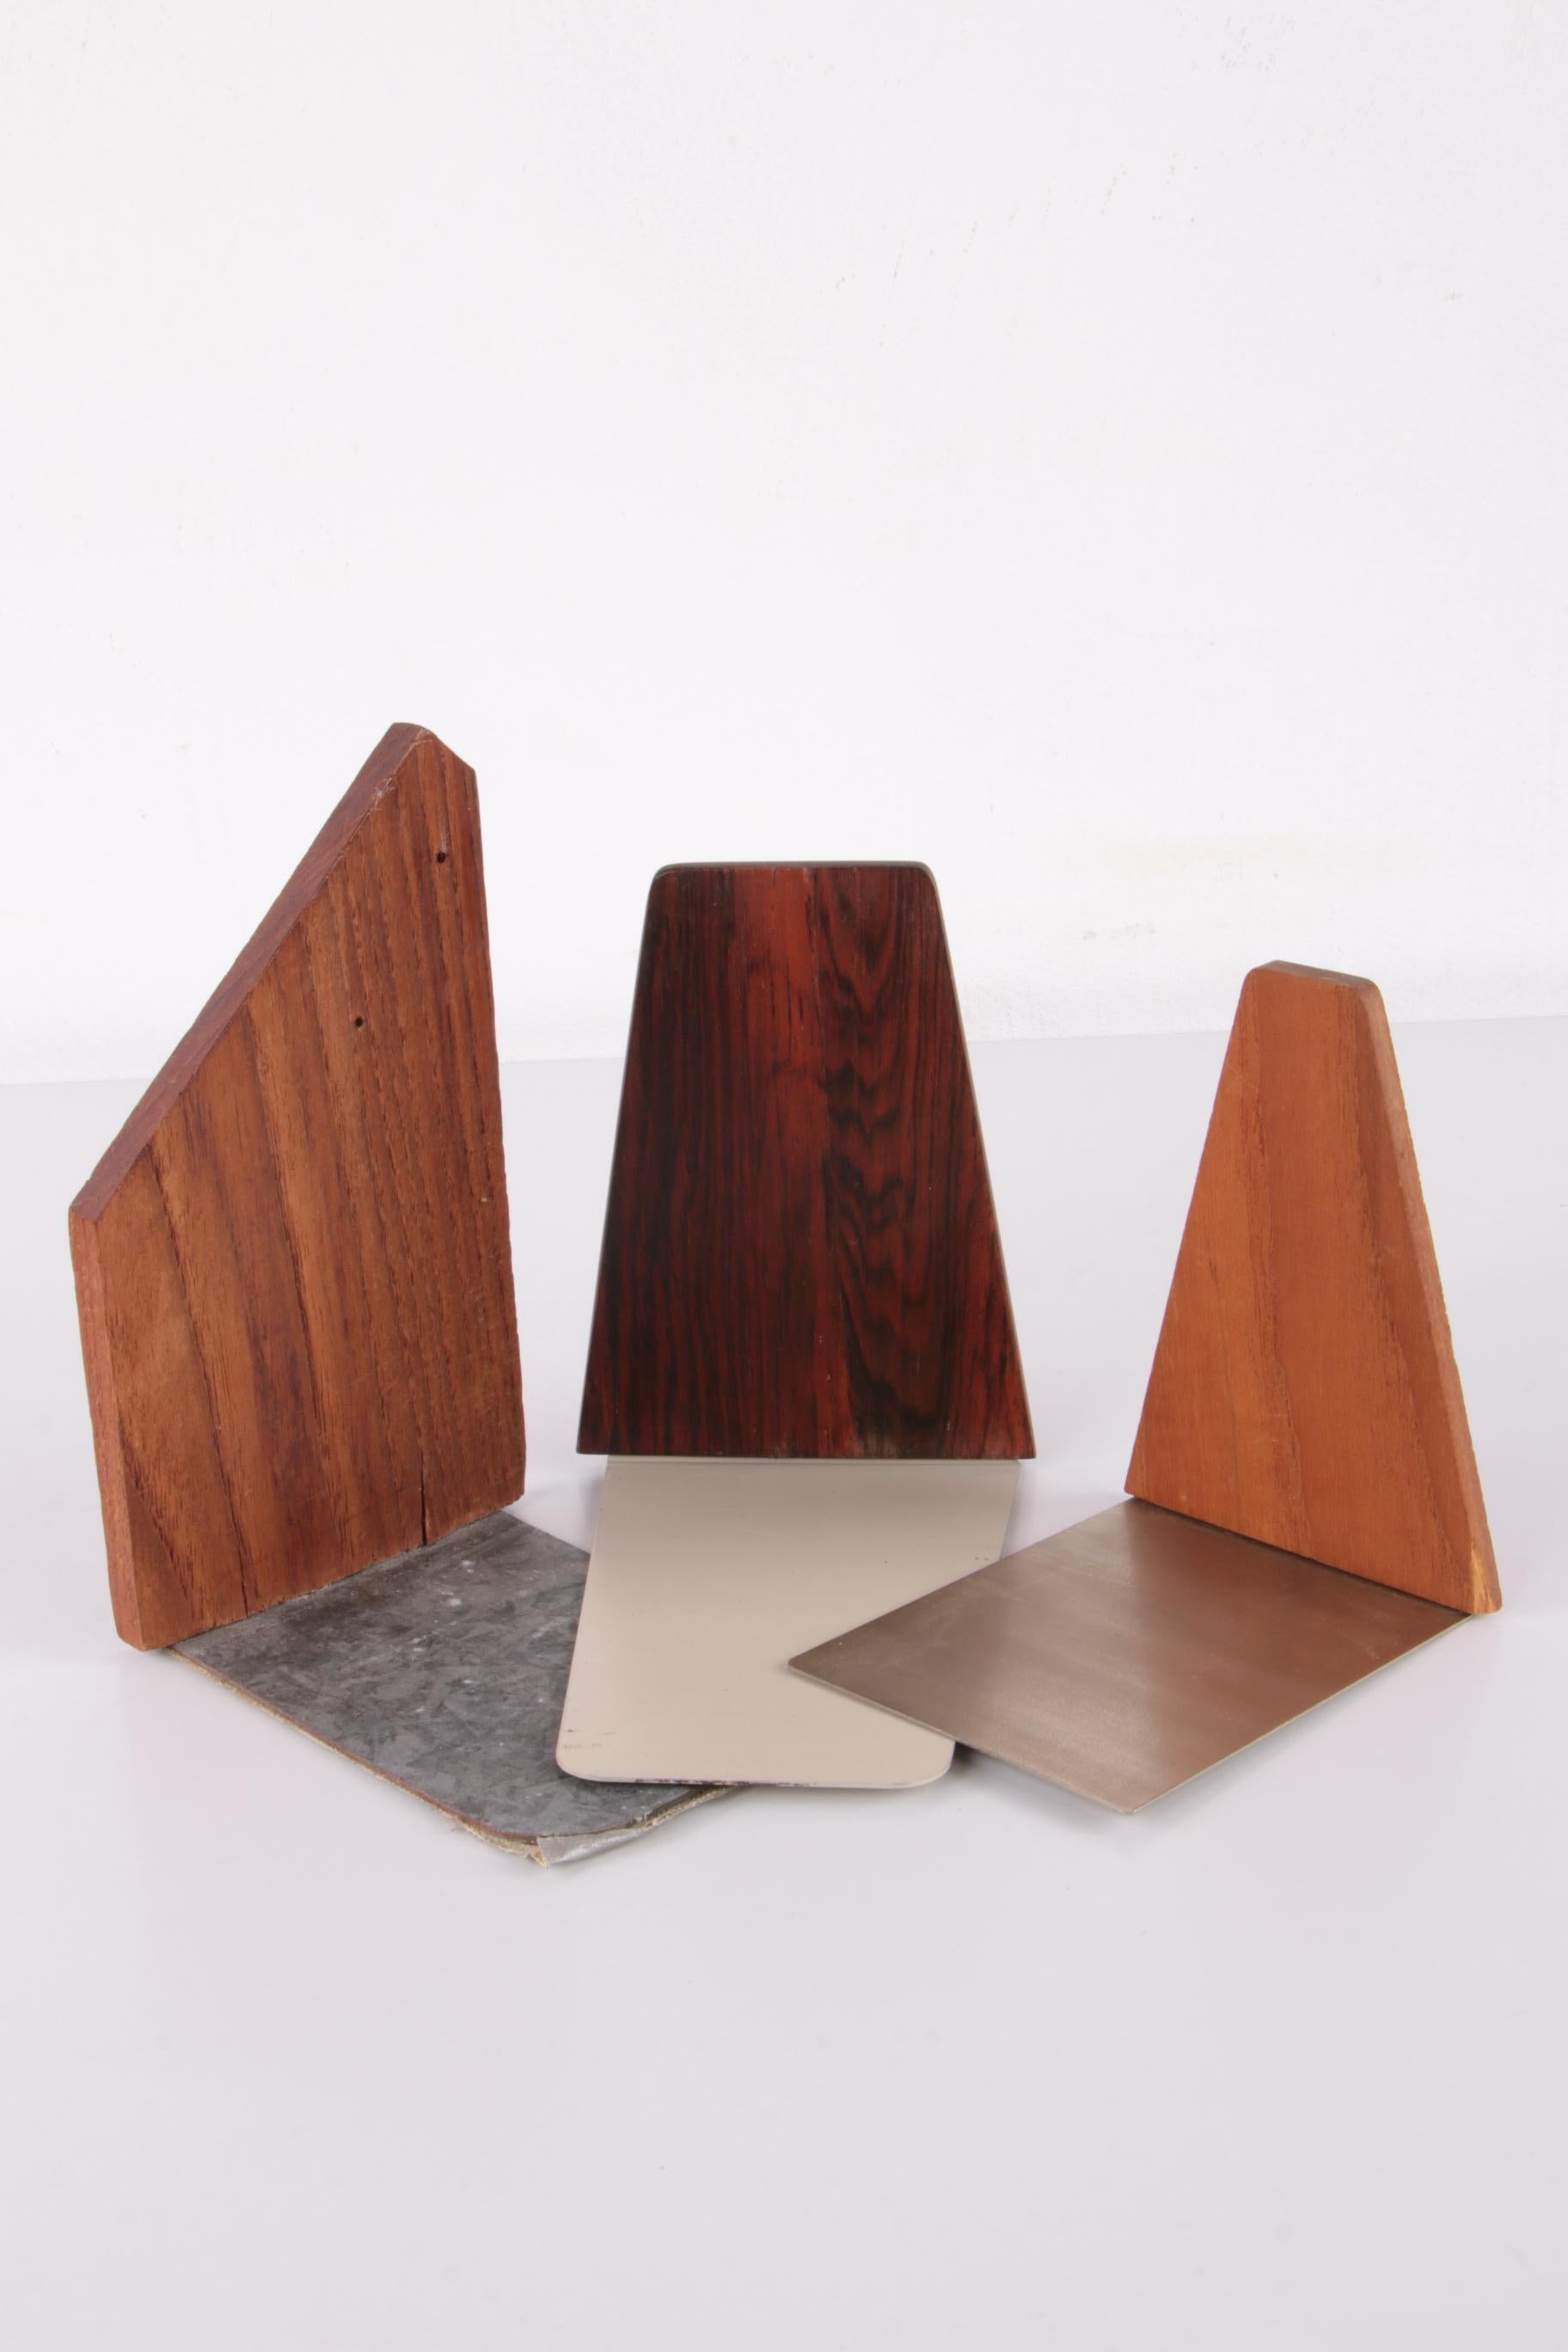 Set of 3 vintage Danish design wooden bookends 1960s


A pair of beautiful mid-century bookends, made of rosewood and teak wood with metal bases in very good condition.

Vintage rosewood and teak wood bookends in a set of 3 made in Denmark.